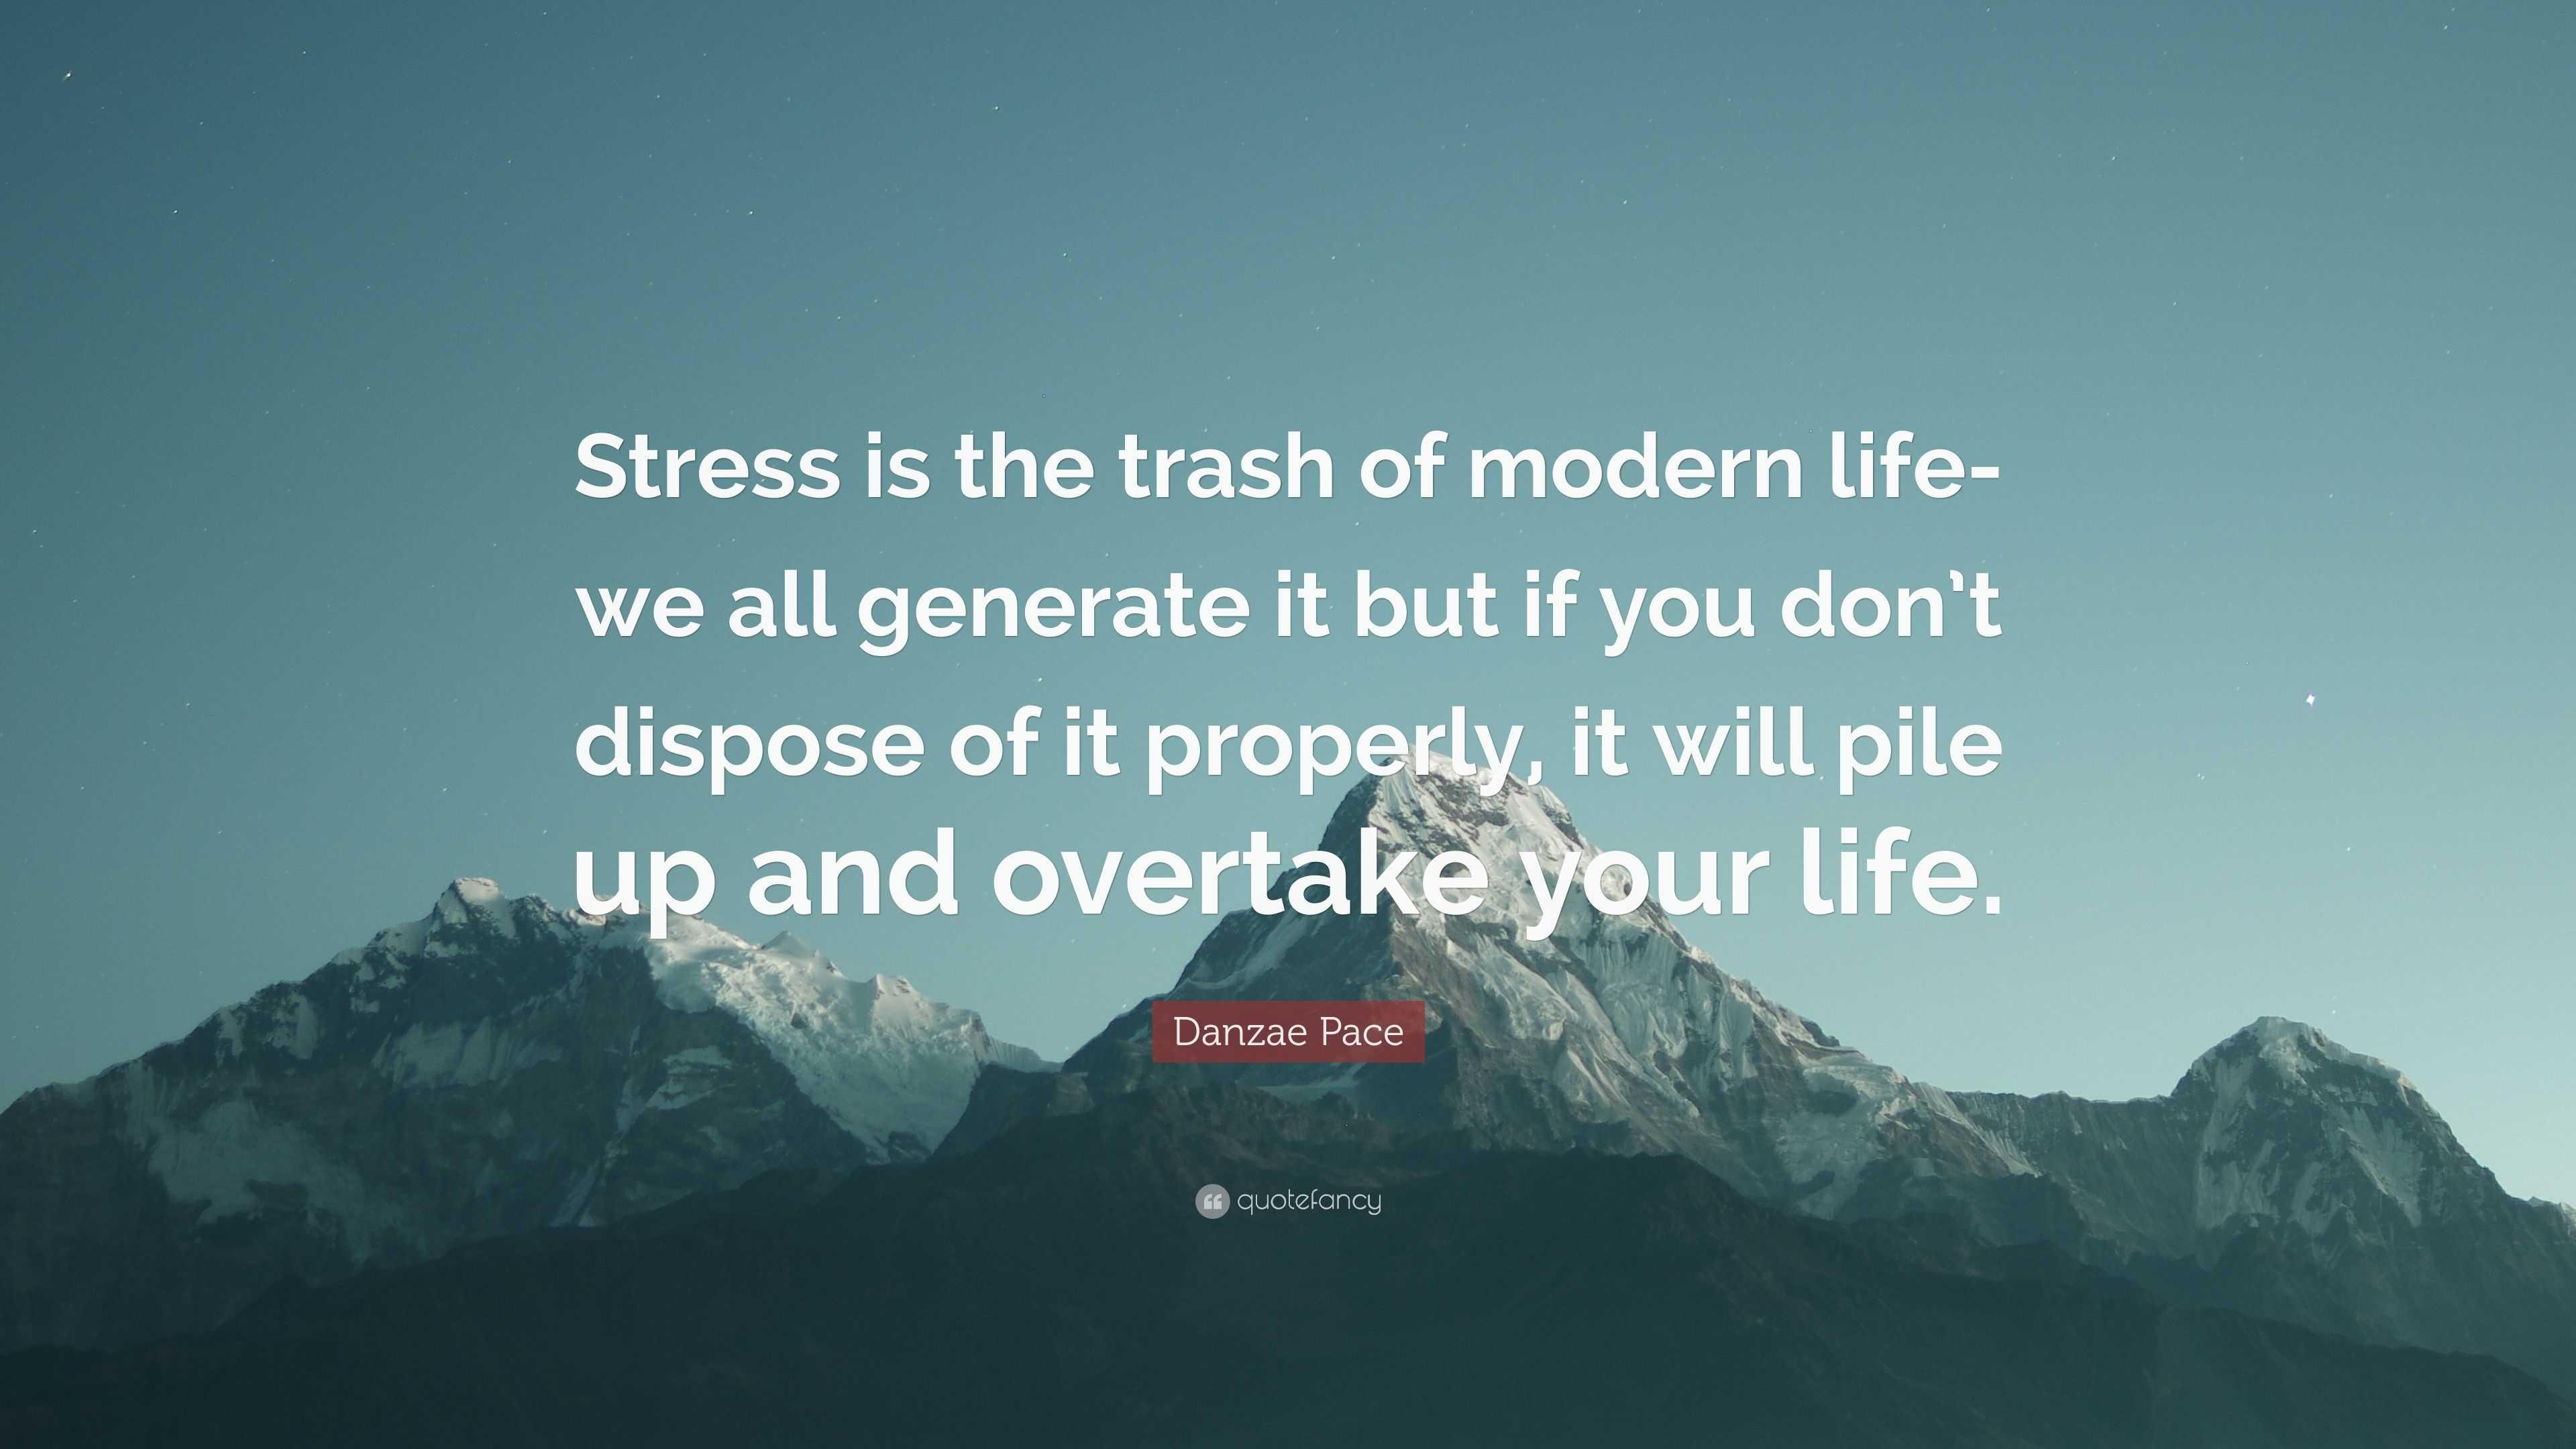 Danzae Pace Quote: “Stress is the trash of modern life-we all generate it  but if you don't dispose of it properly, it will pile up and overt...” (7  wallpapers) - Quotefancy